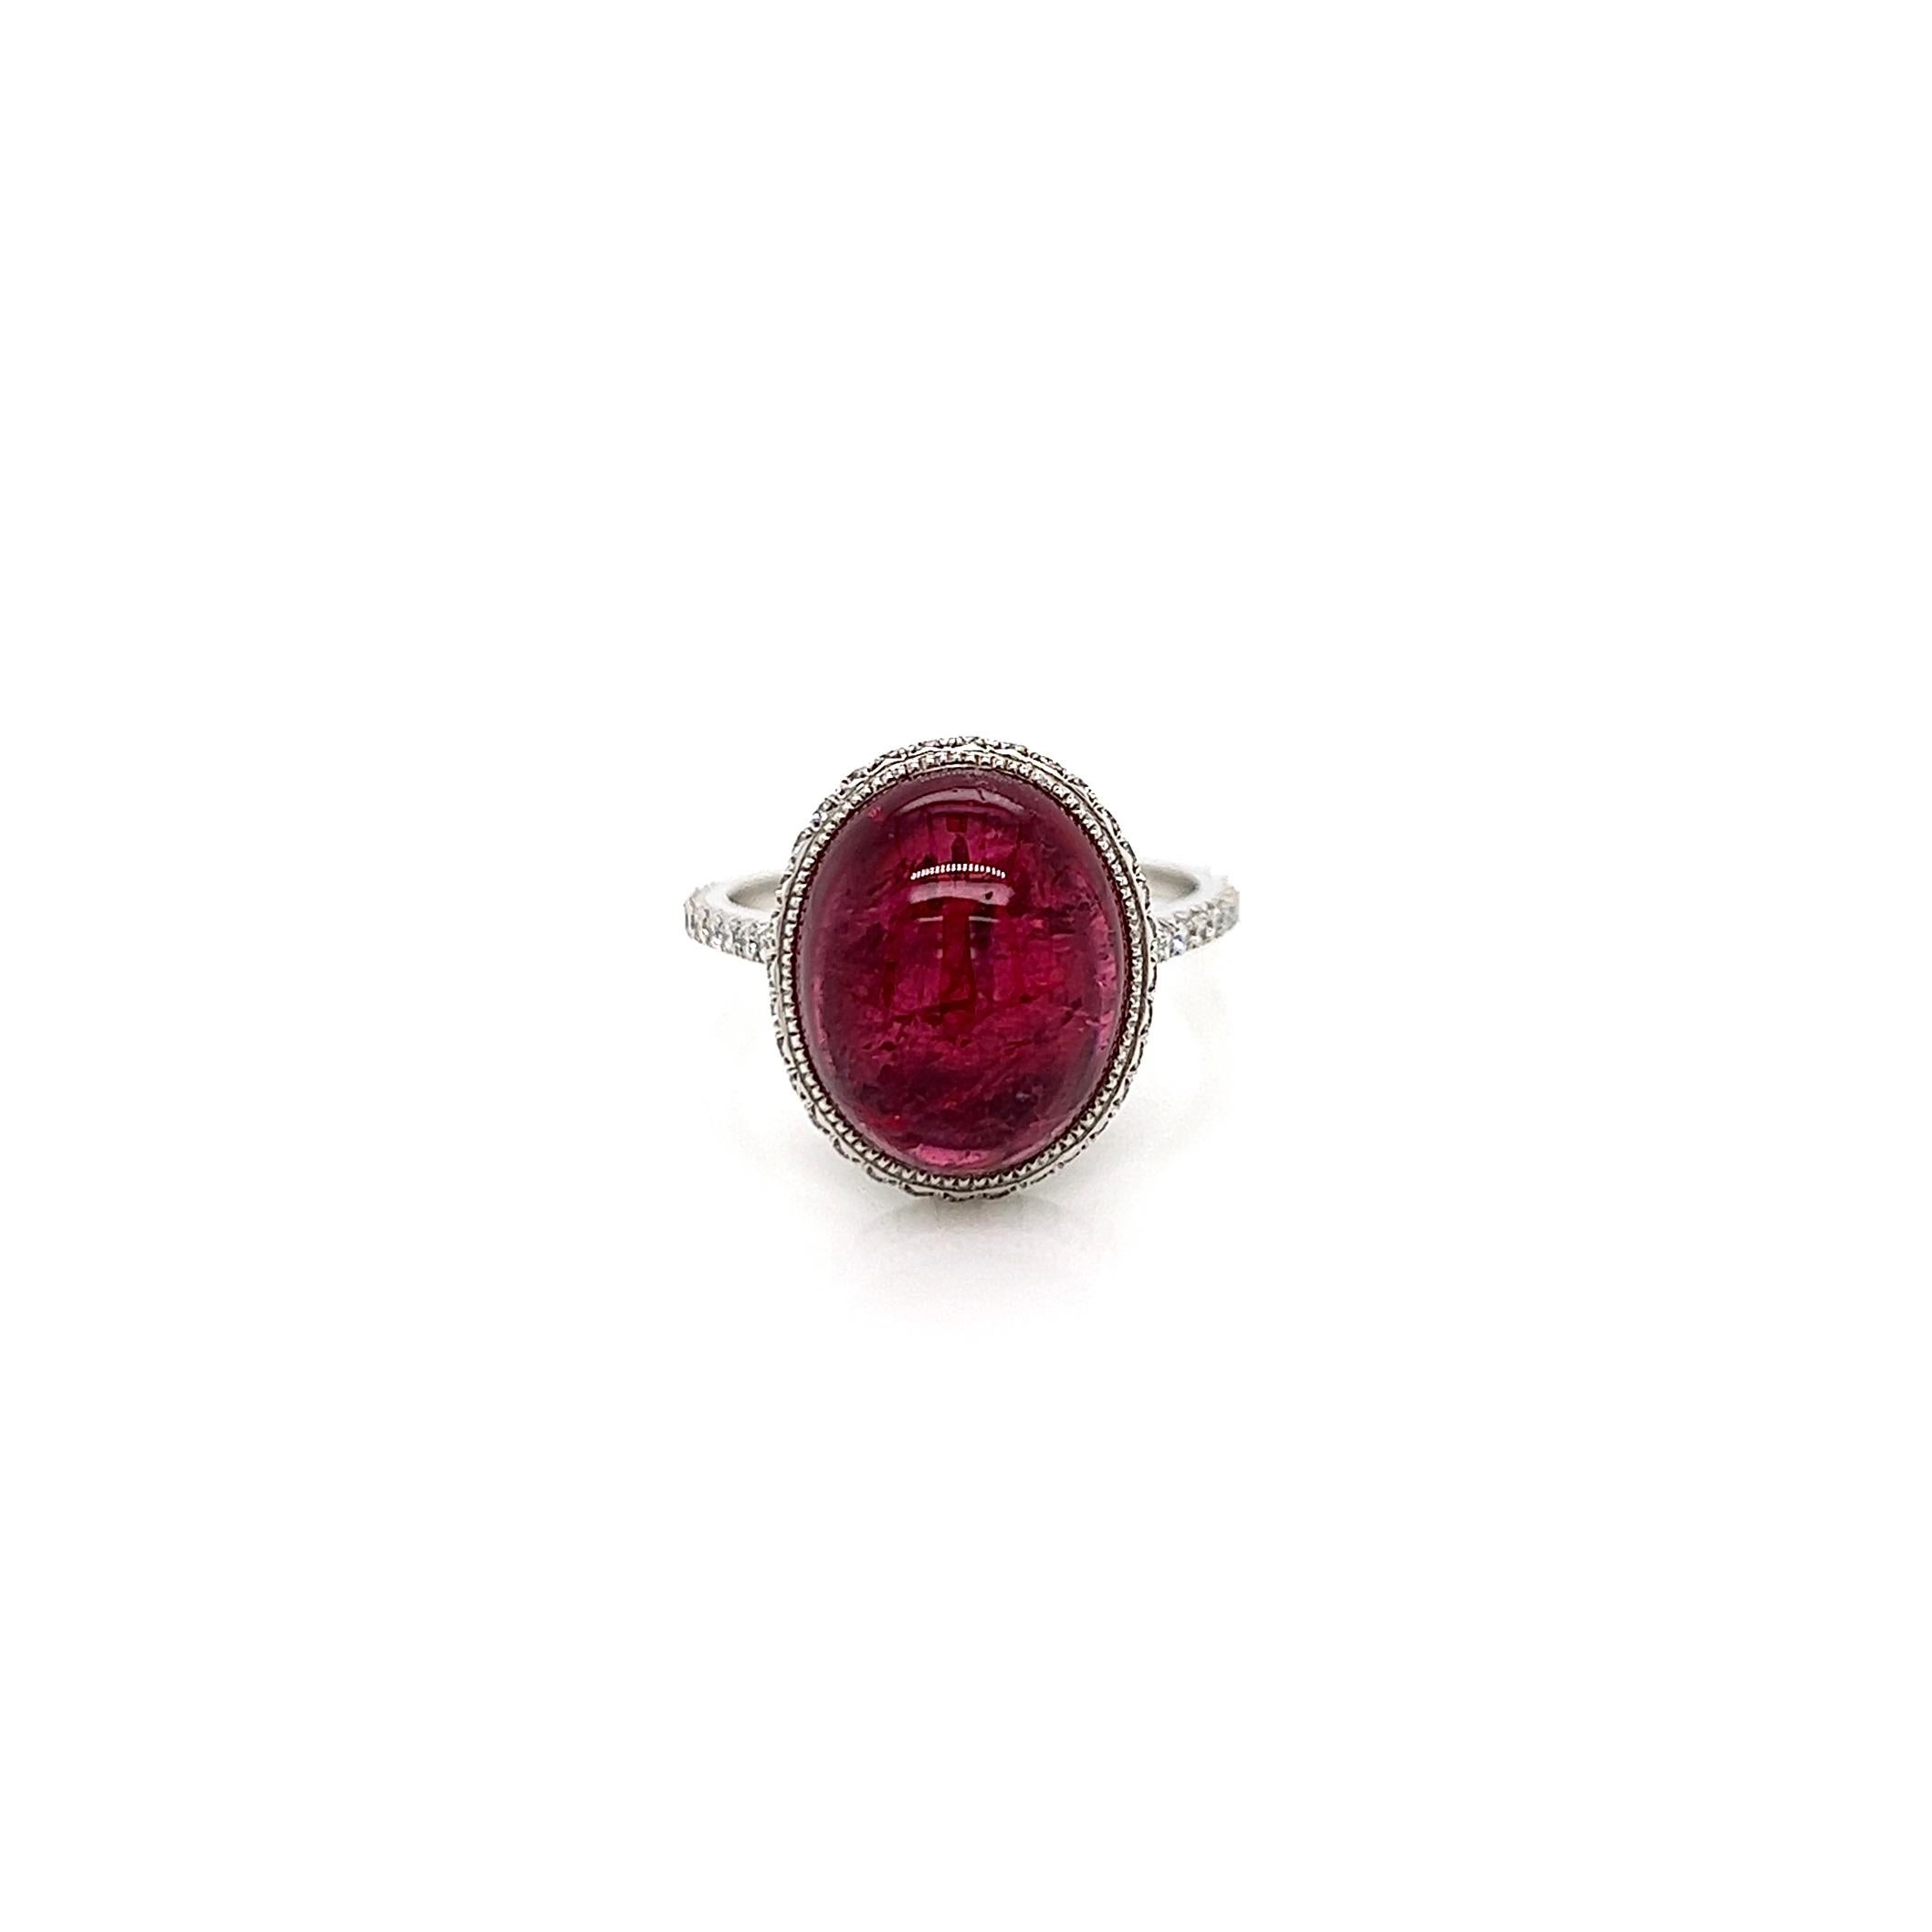 7.70 Total Carat Pink Tourmaline and Diamond Cocktail Ring

-Metal Type: Platinum 
-7.20 Carat Oval Cut Pink Tourmaline 
-0.50 Carat Round Side Natural Diamonds, F-G Color, VS1-VS2 Clarity
-Size 6.25

Made in New York City